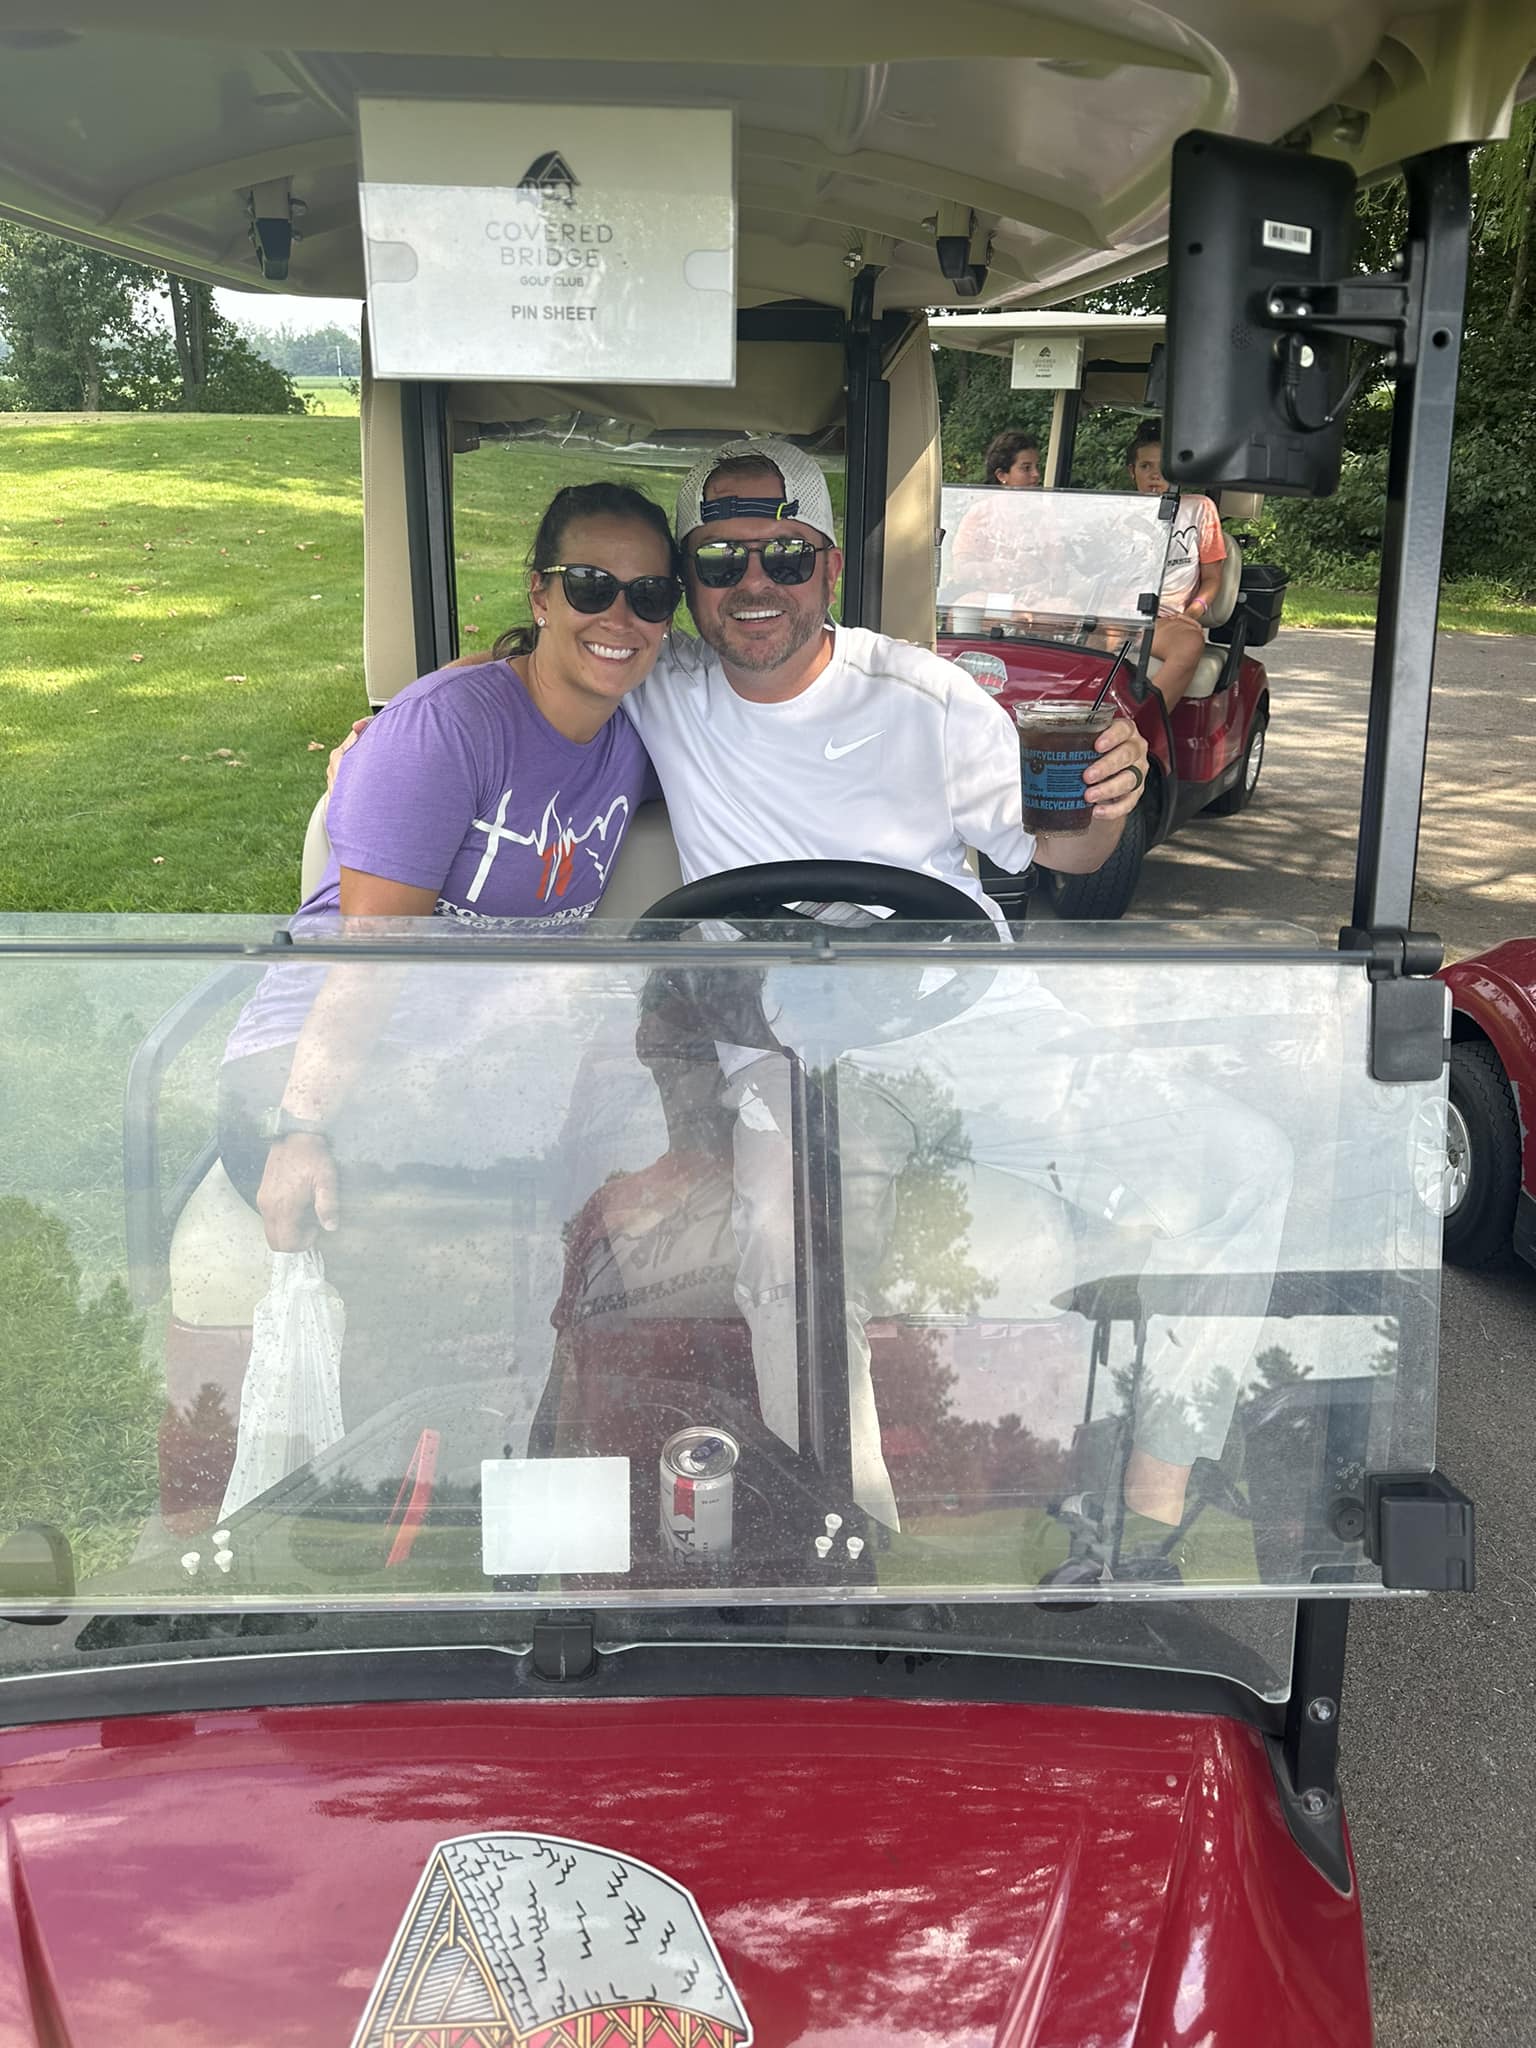 Two golfers sitting in a golf cart smiling at the camera.